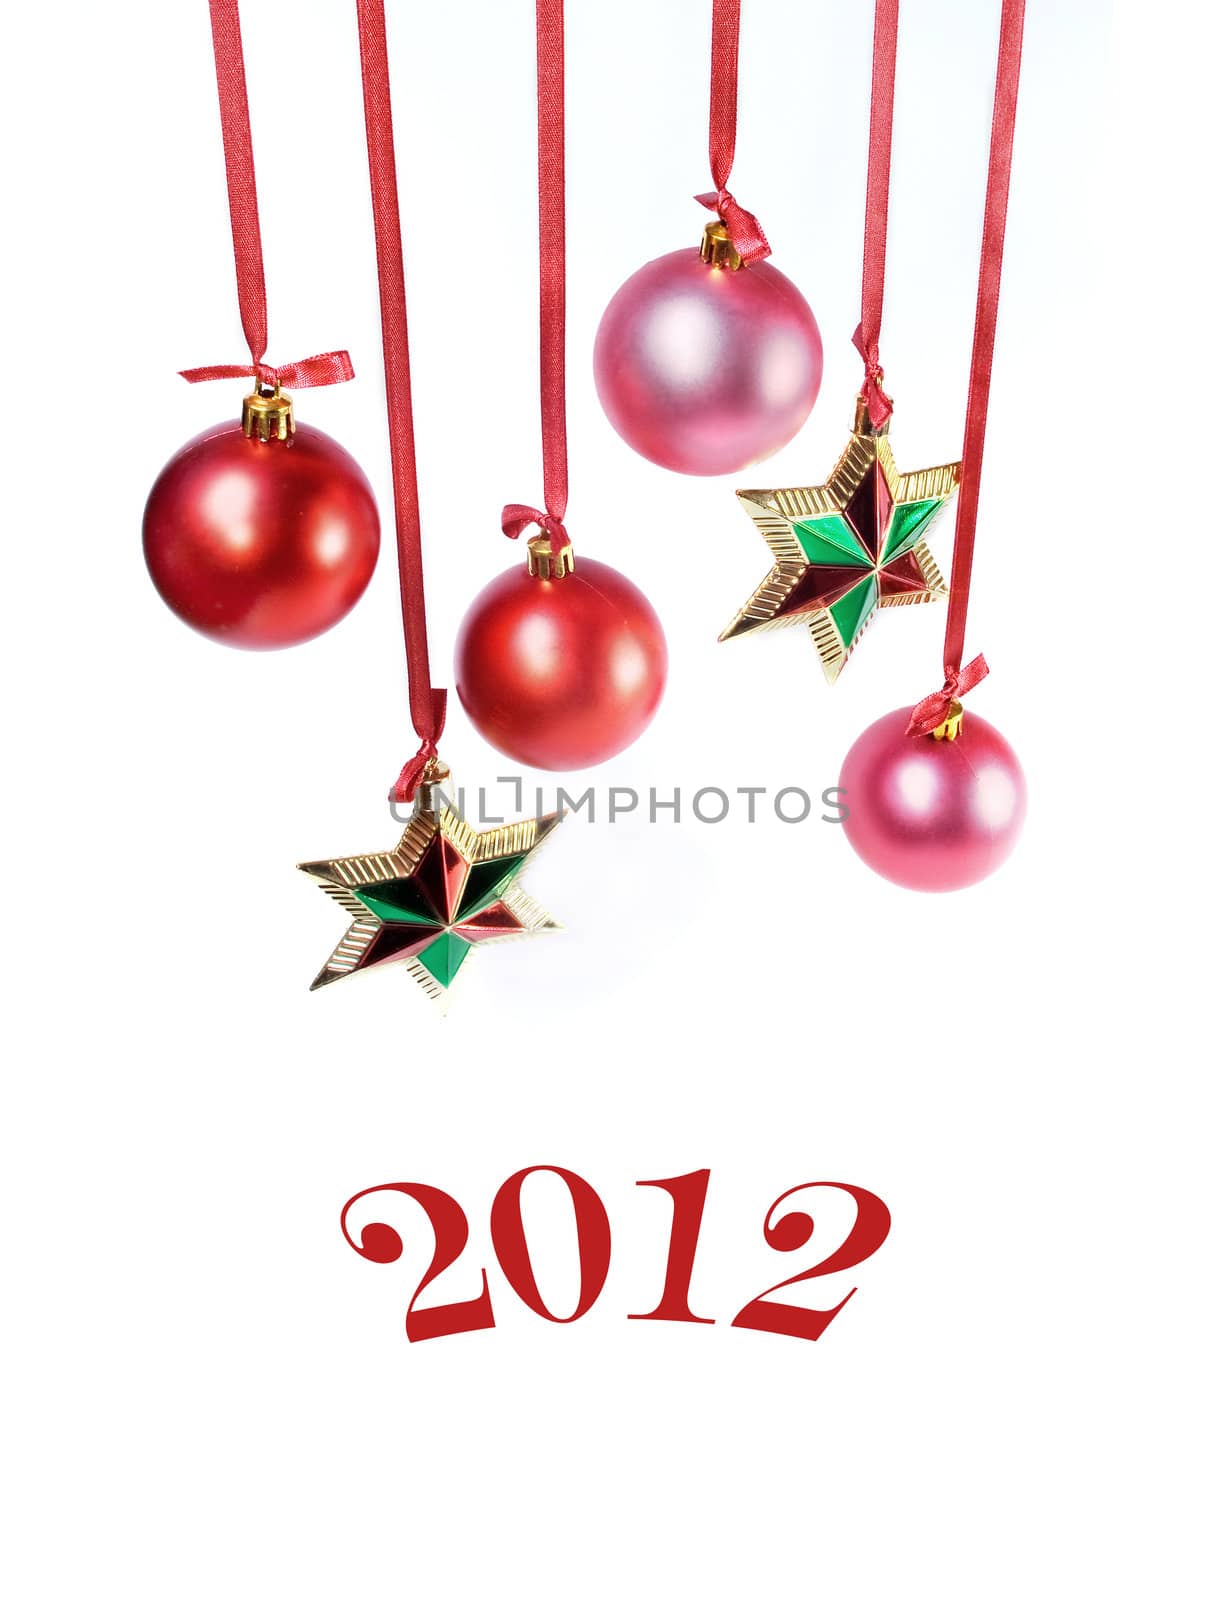 Christmas card with stars and red spheres 